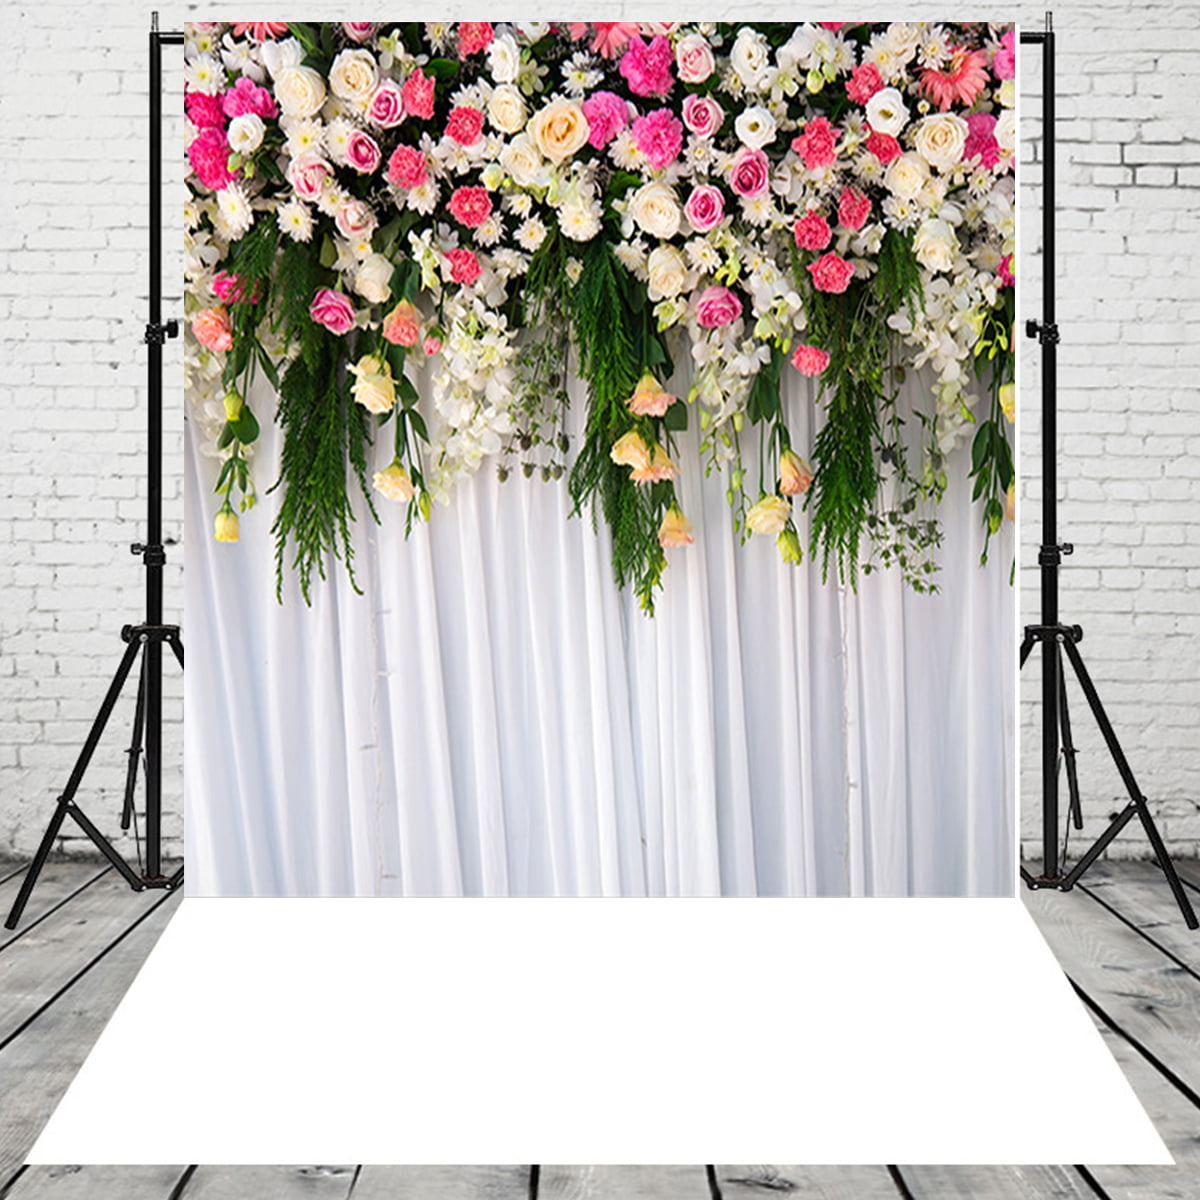 Photography background vinilo Studio props Flowers wall Wedding Decor Home